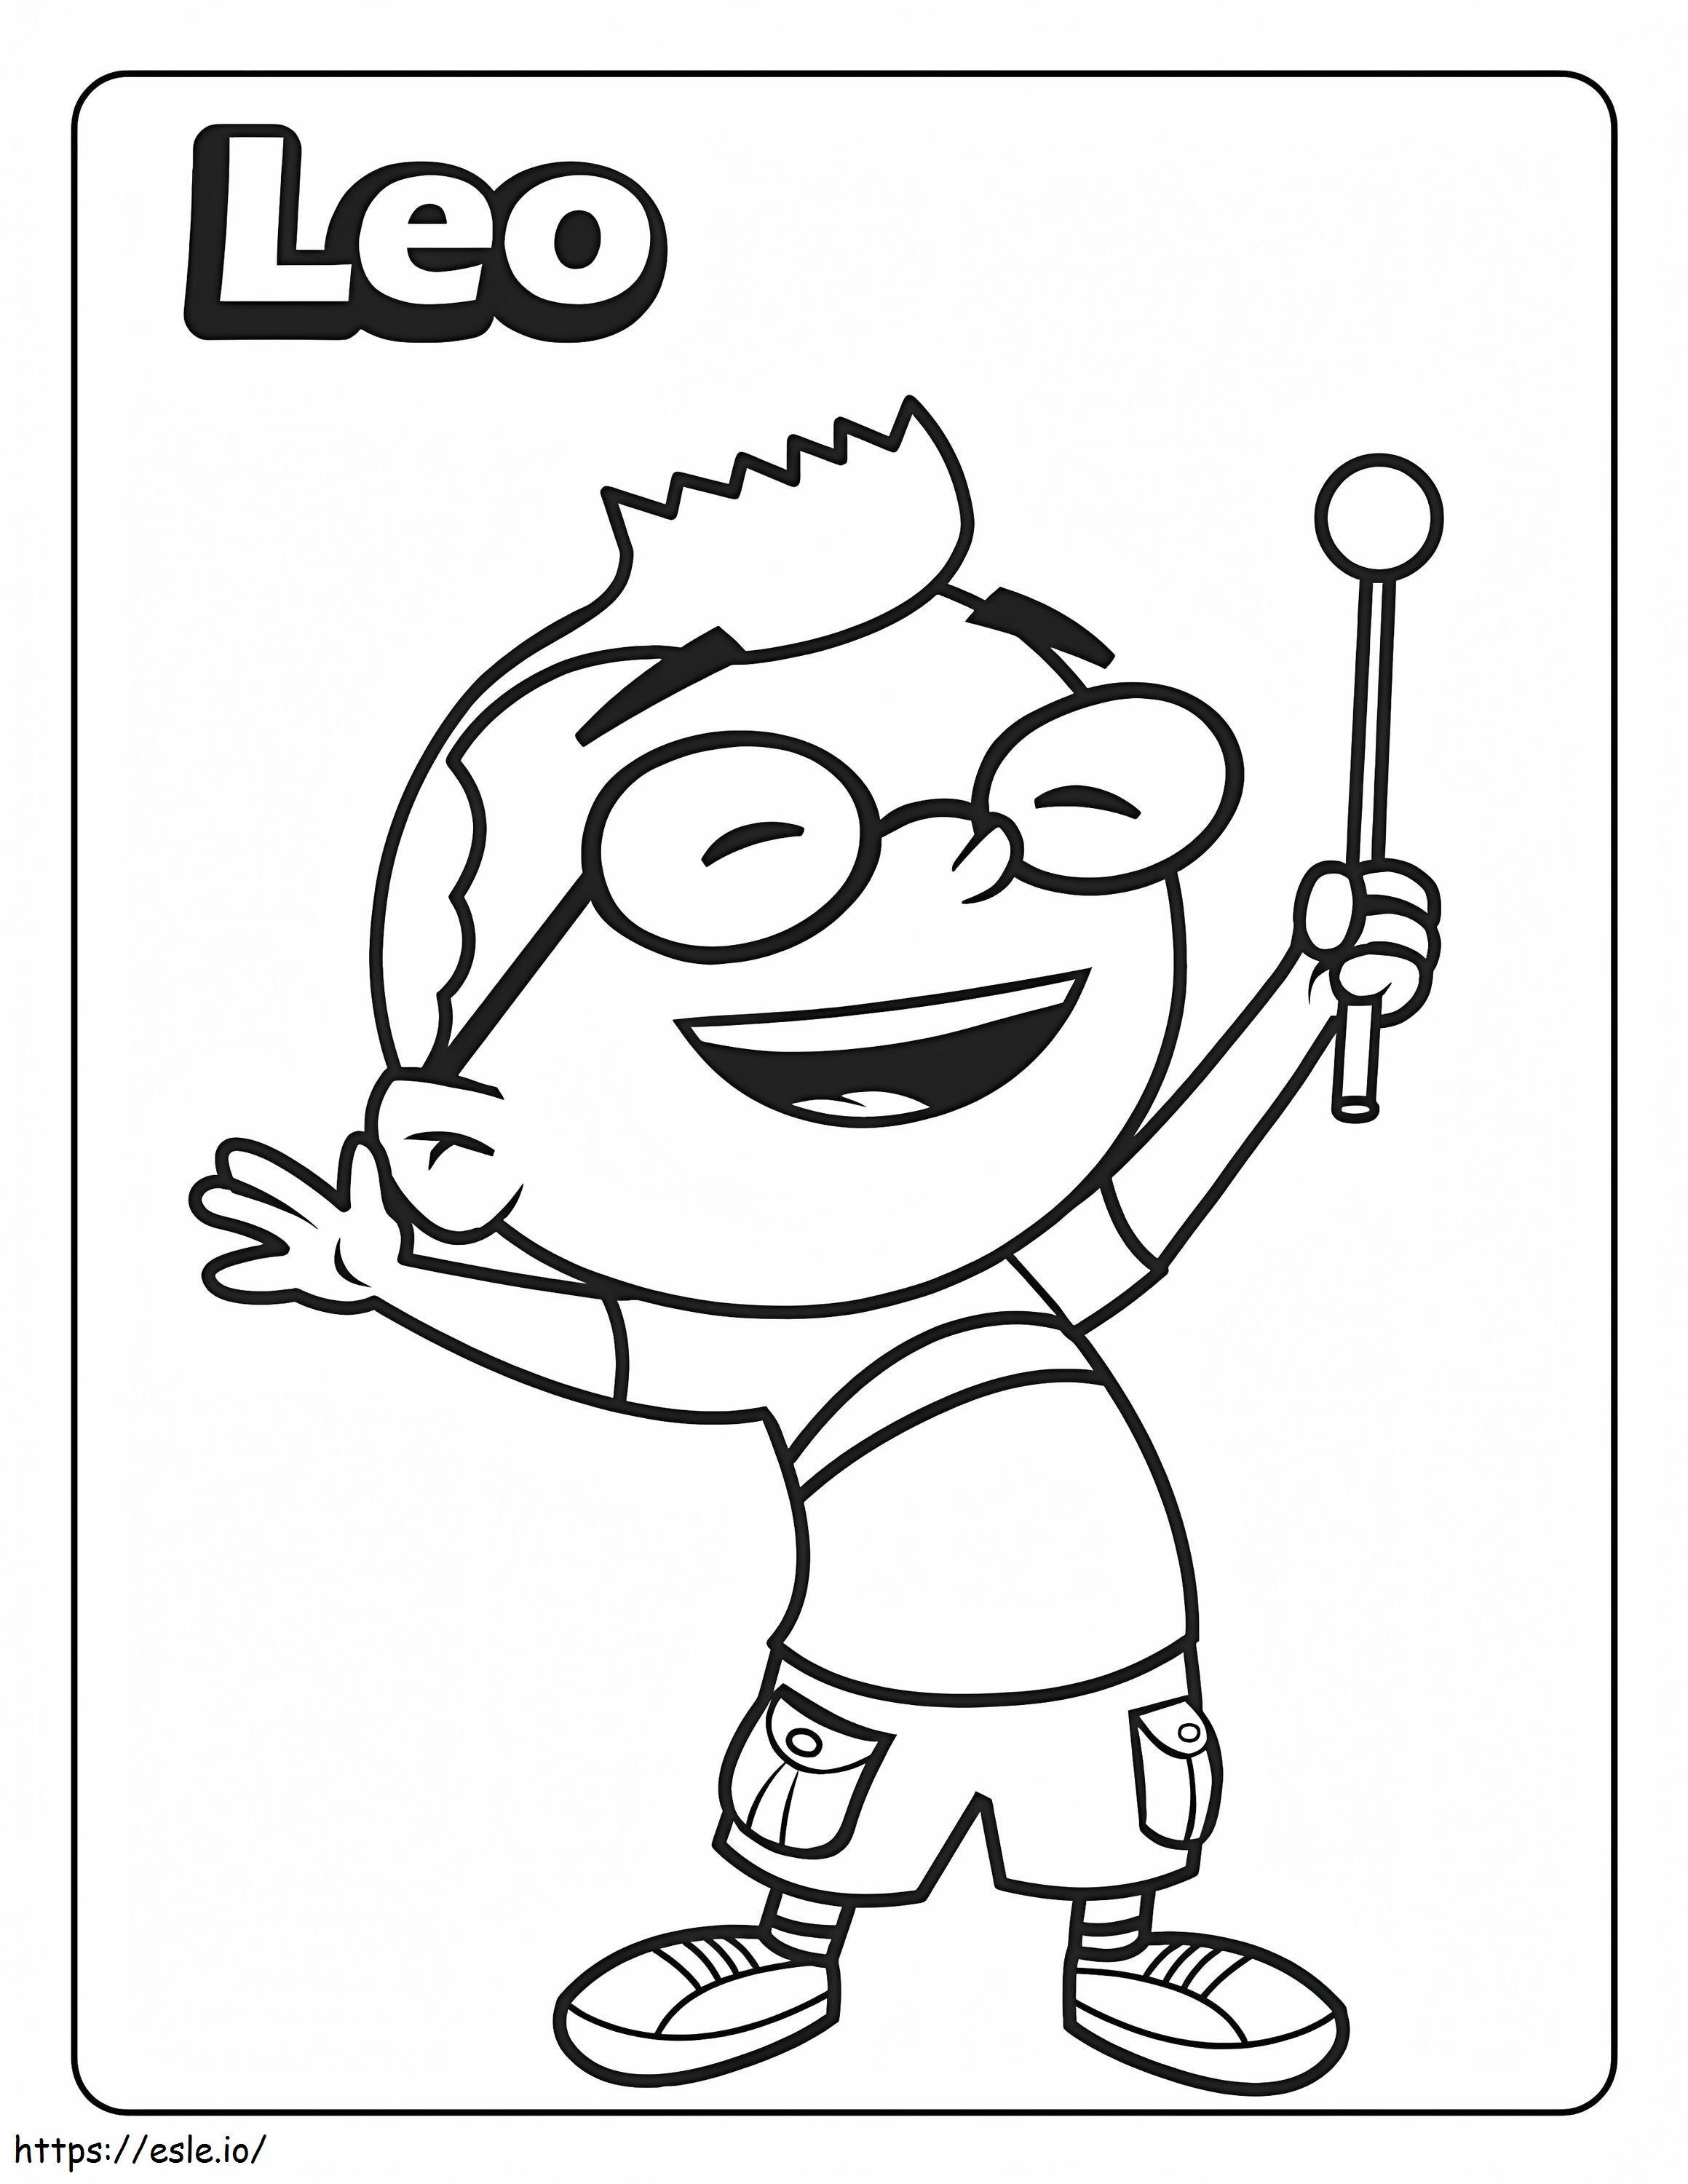 1580979519 And Leo 01 coloring page